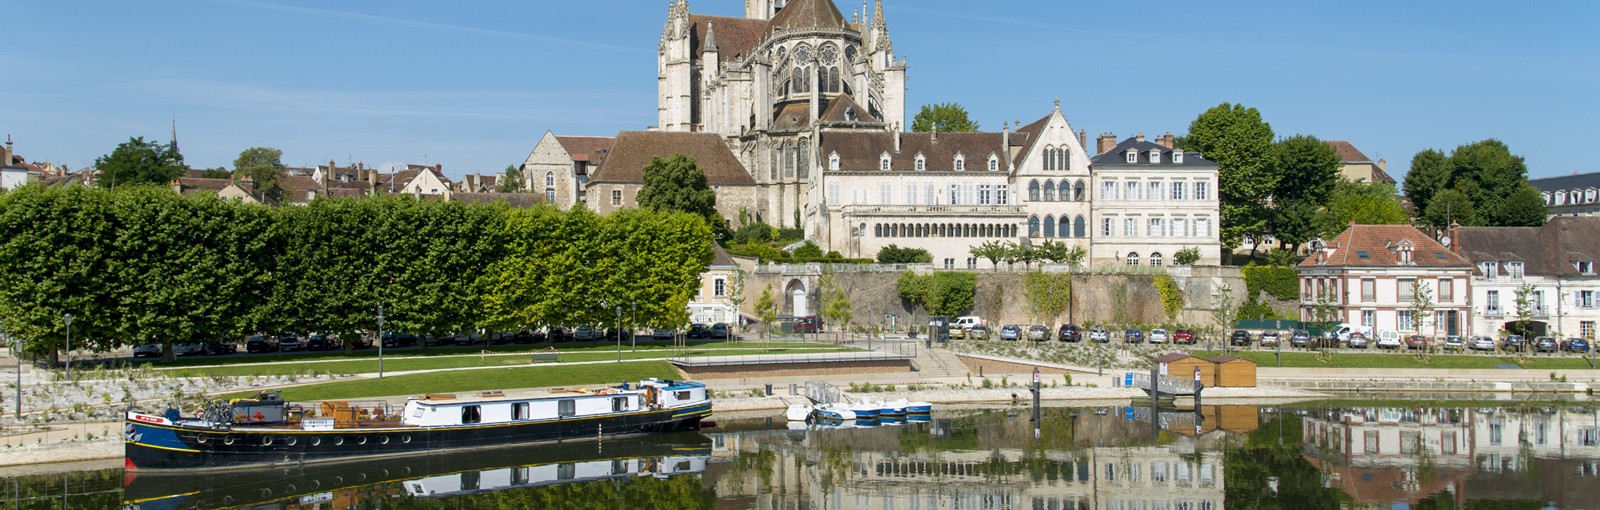 Tours Burgundy / Auxerre - Full days - Day tours from Paris